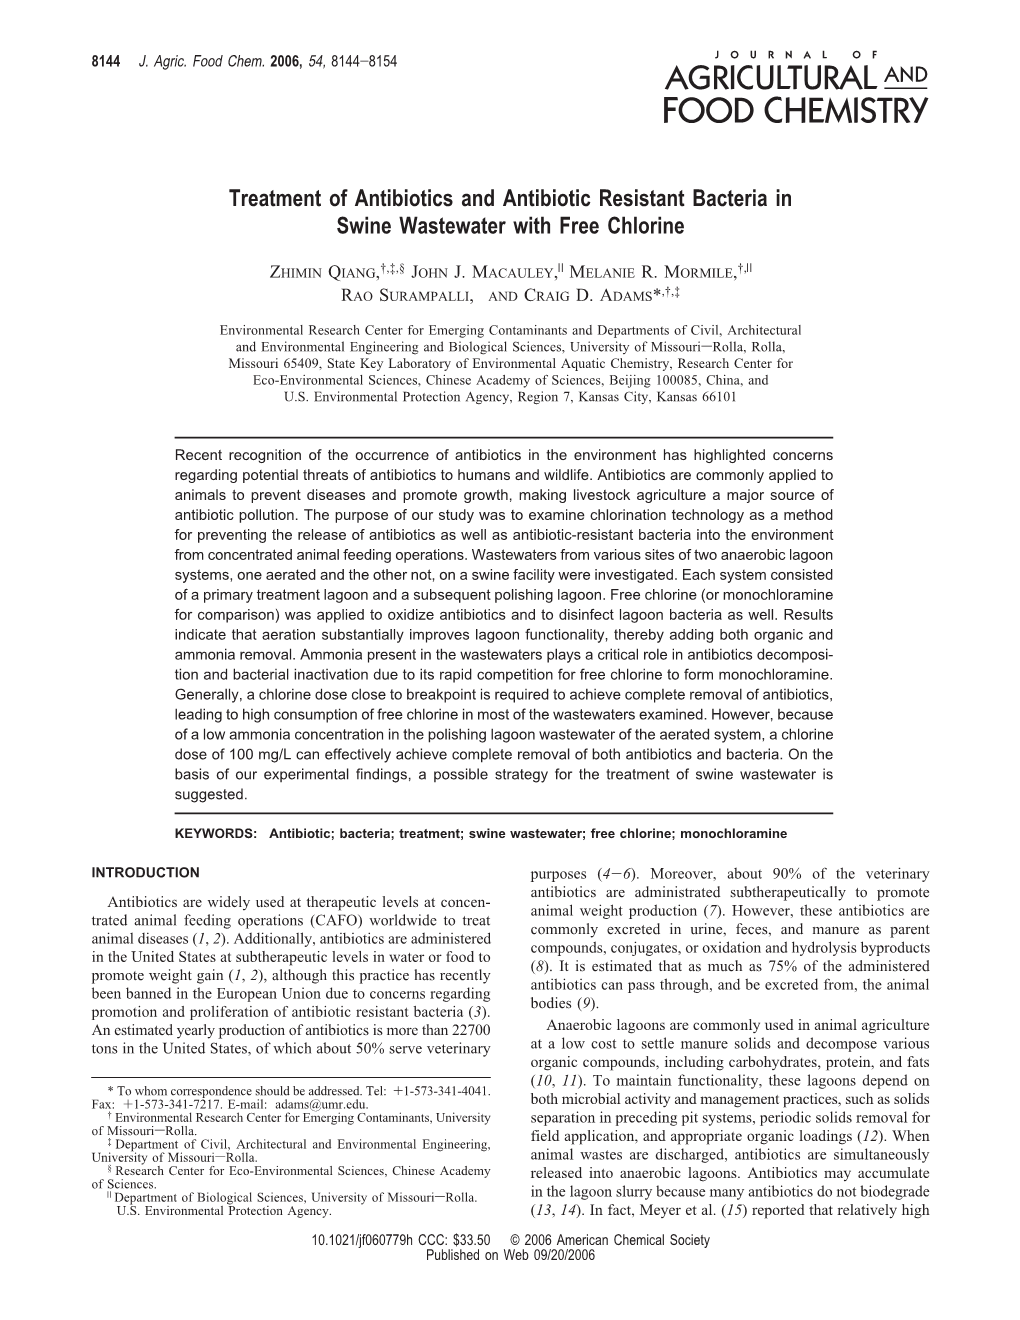 Treatment of Antibiotics and Antibiotic Resistant Bacteria in Swine Wastewater with Free Chlorine